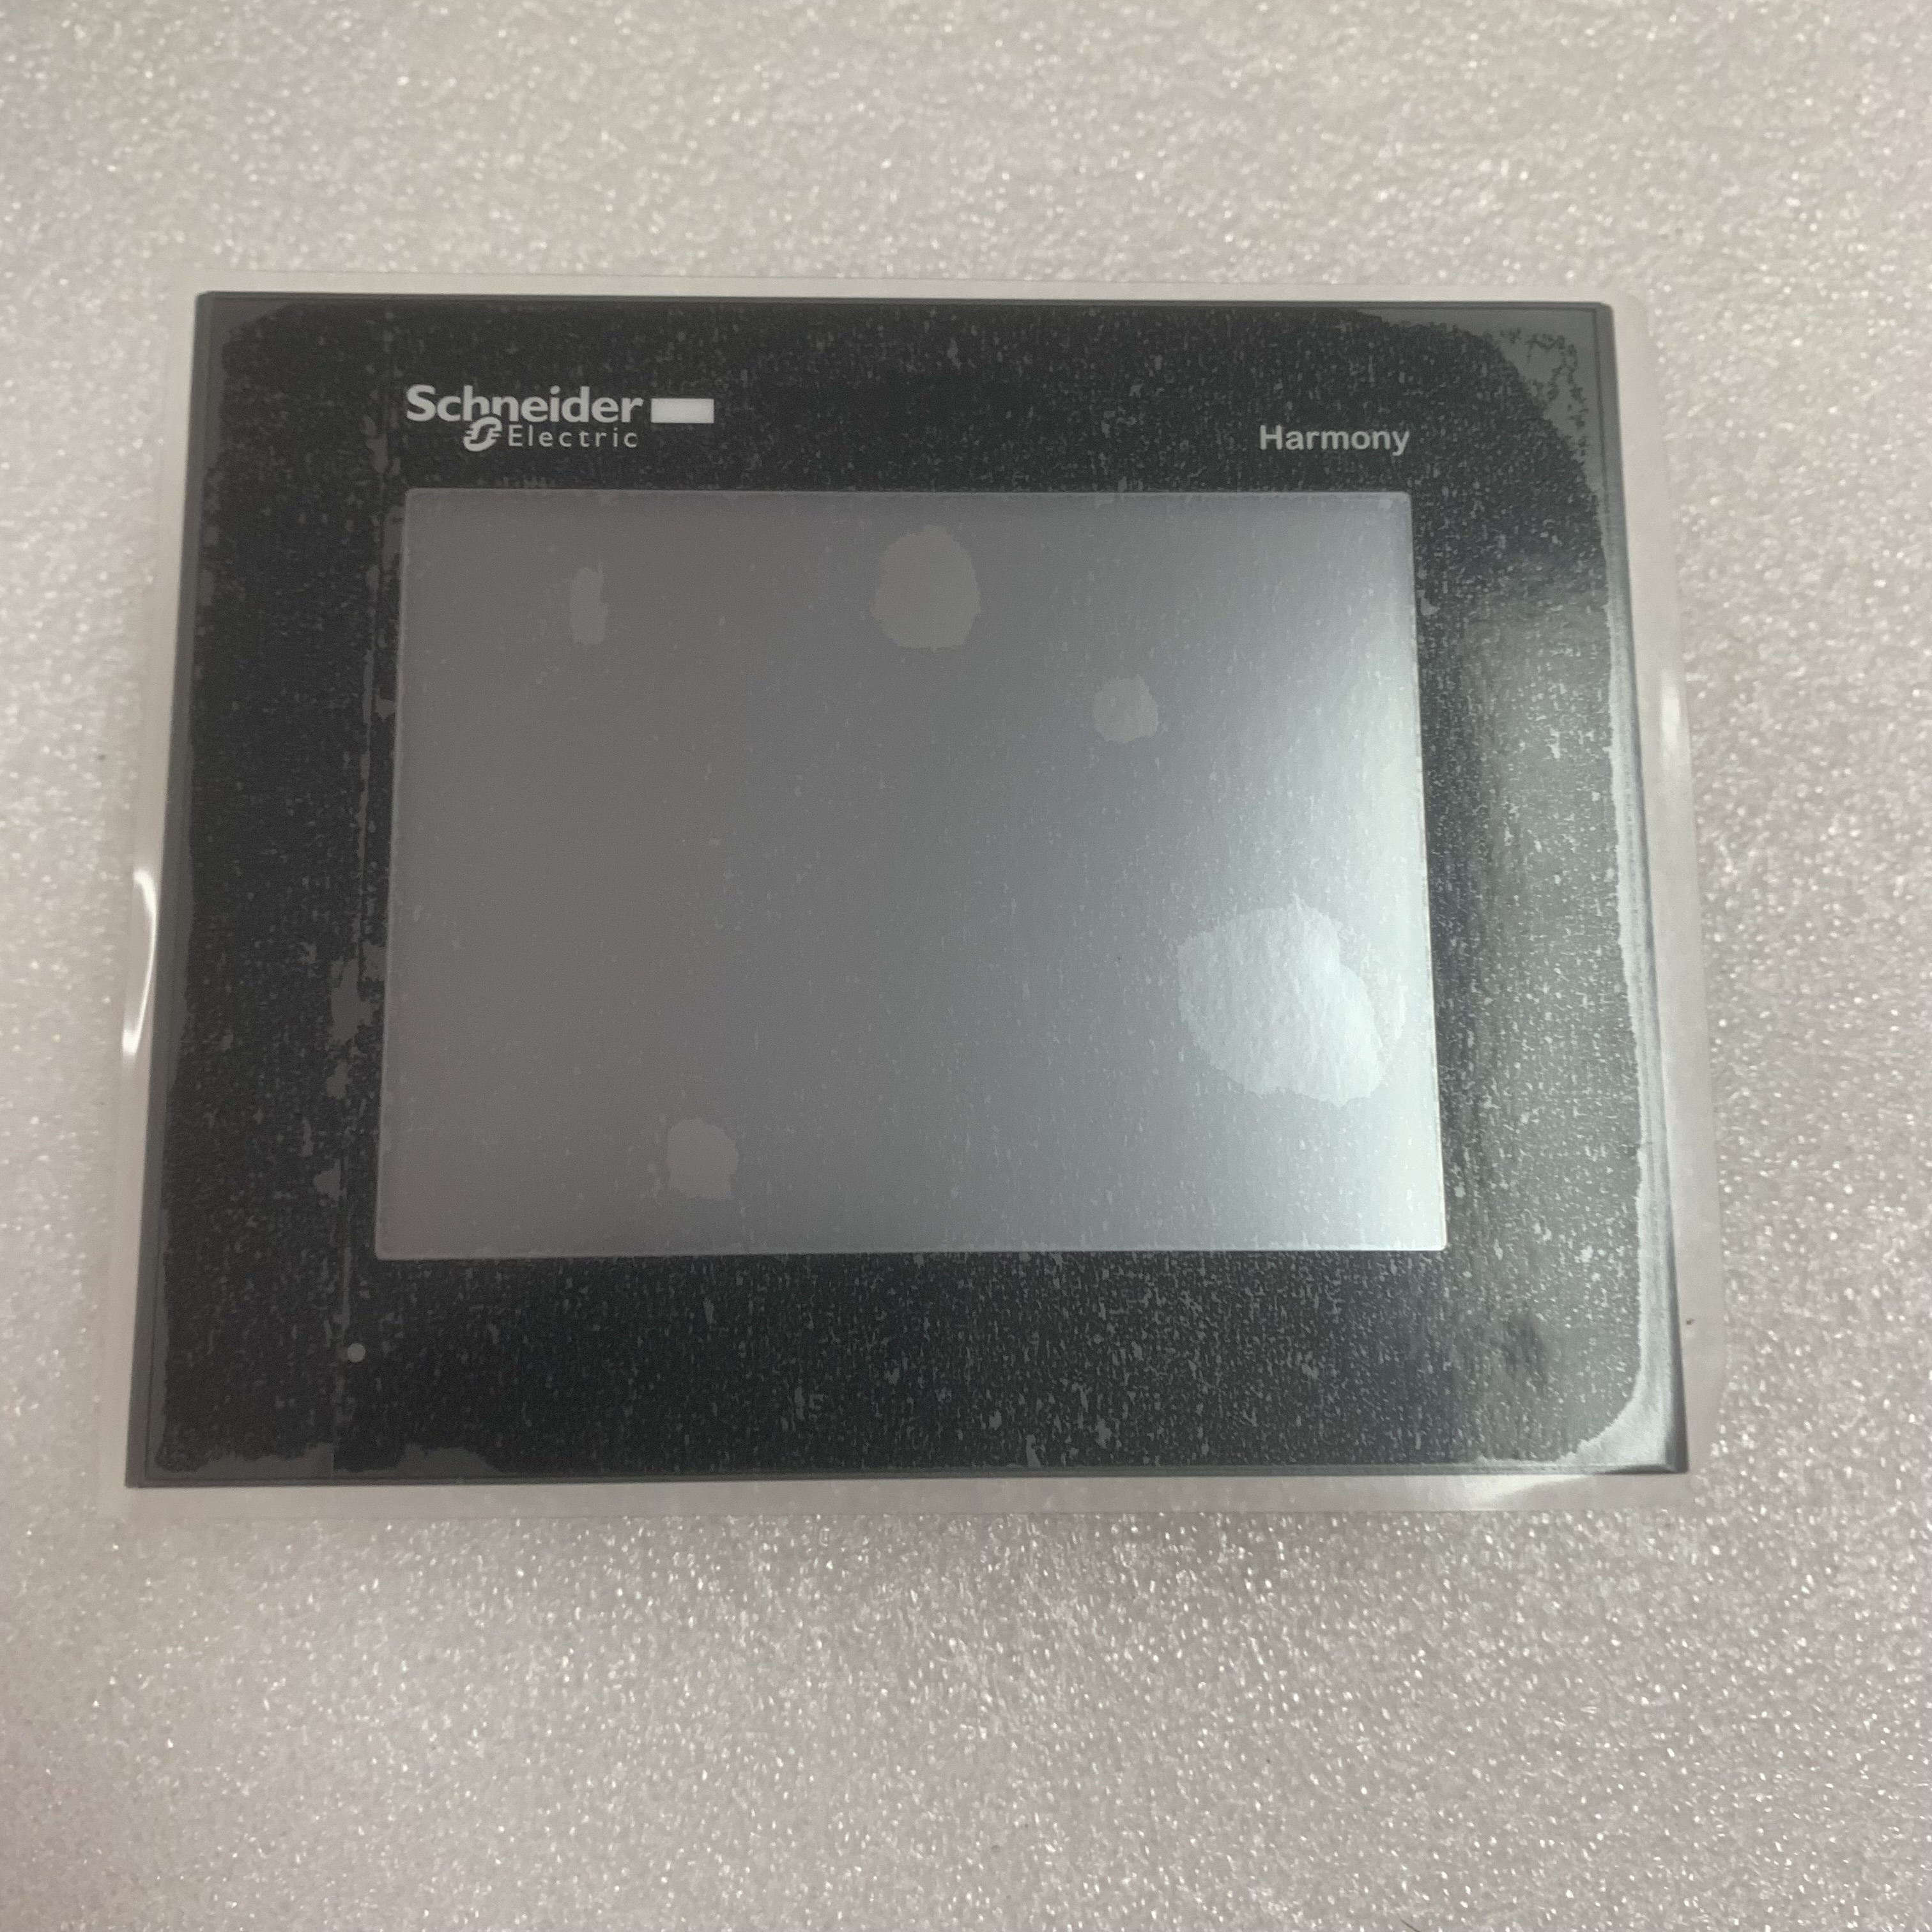 Schneider HMIGTO2310 OPERATOR INTERFACE ADVANCED TOUCHSCREEN PANEL 5.7 INCH NEW